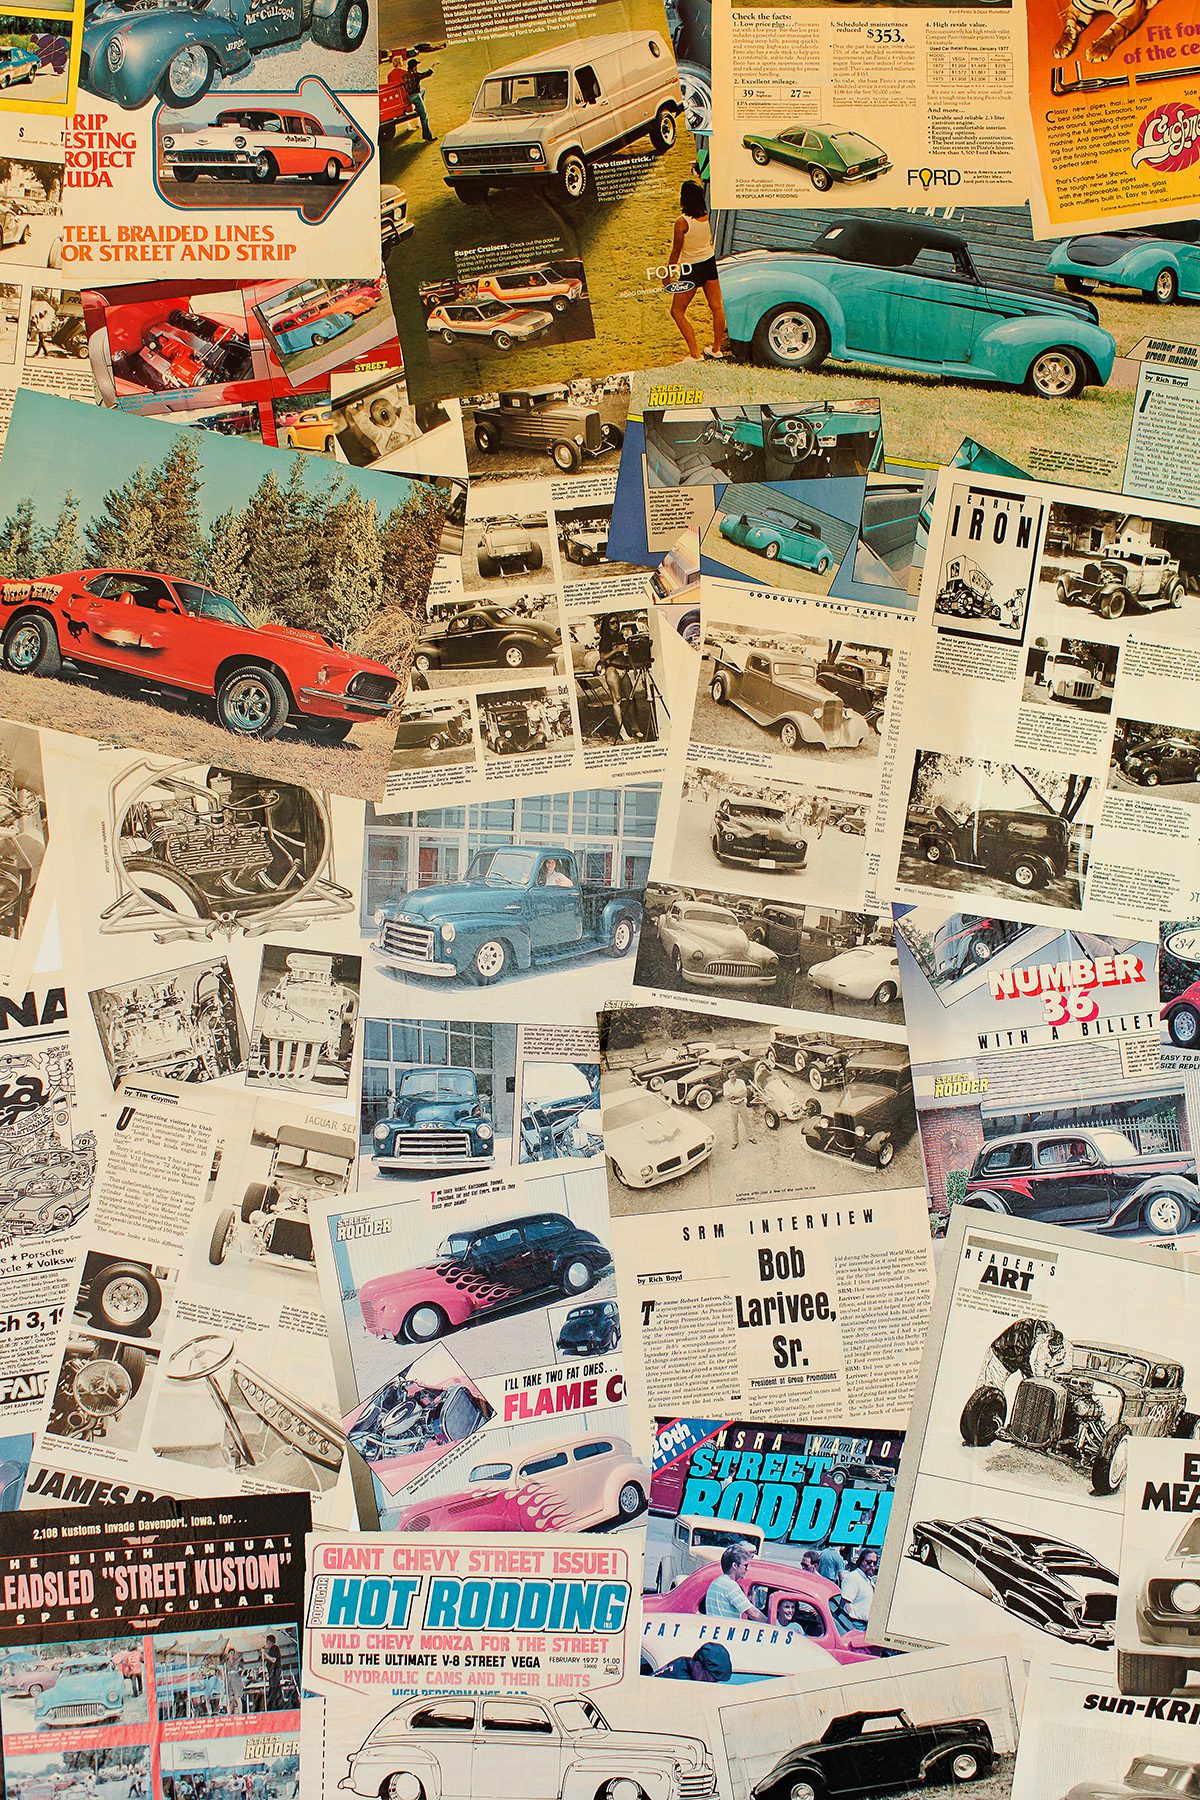 Modge podge wall of classic car magazines at Speeding Springs in Dripping Springs, Texas